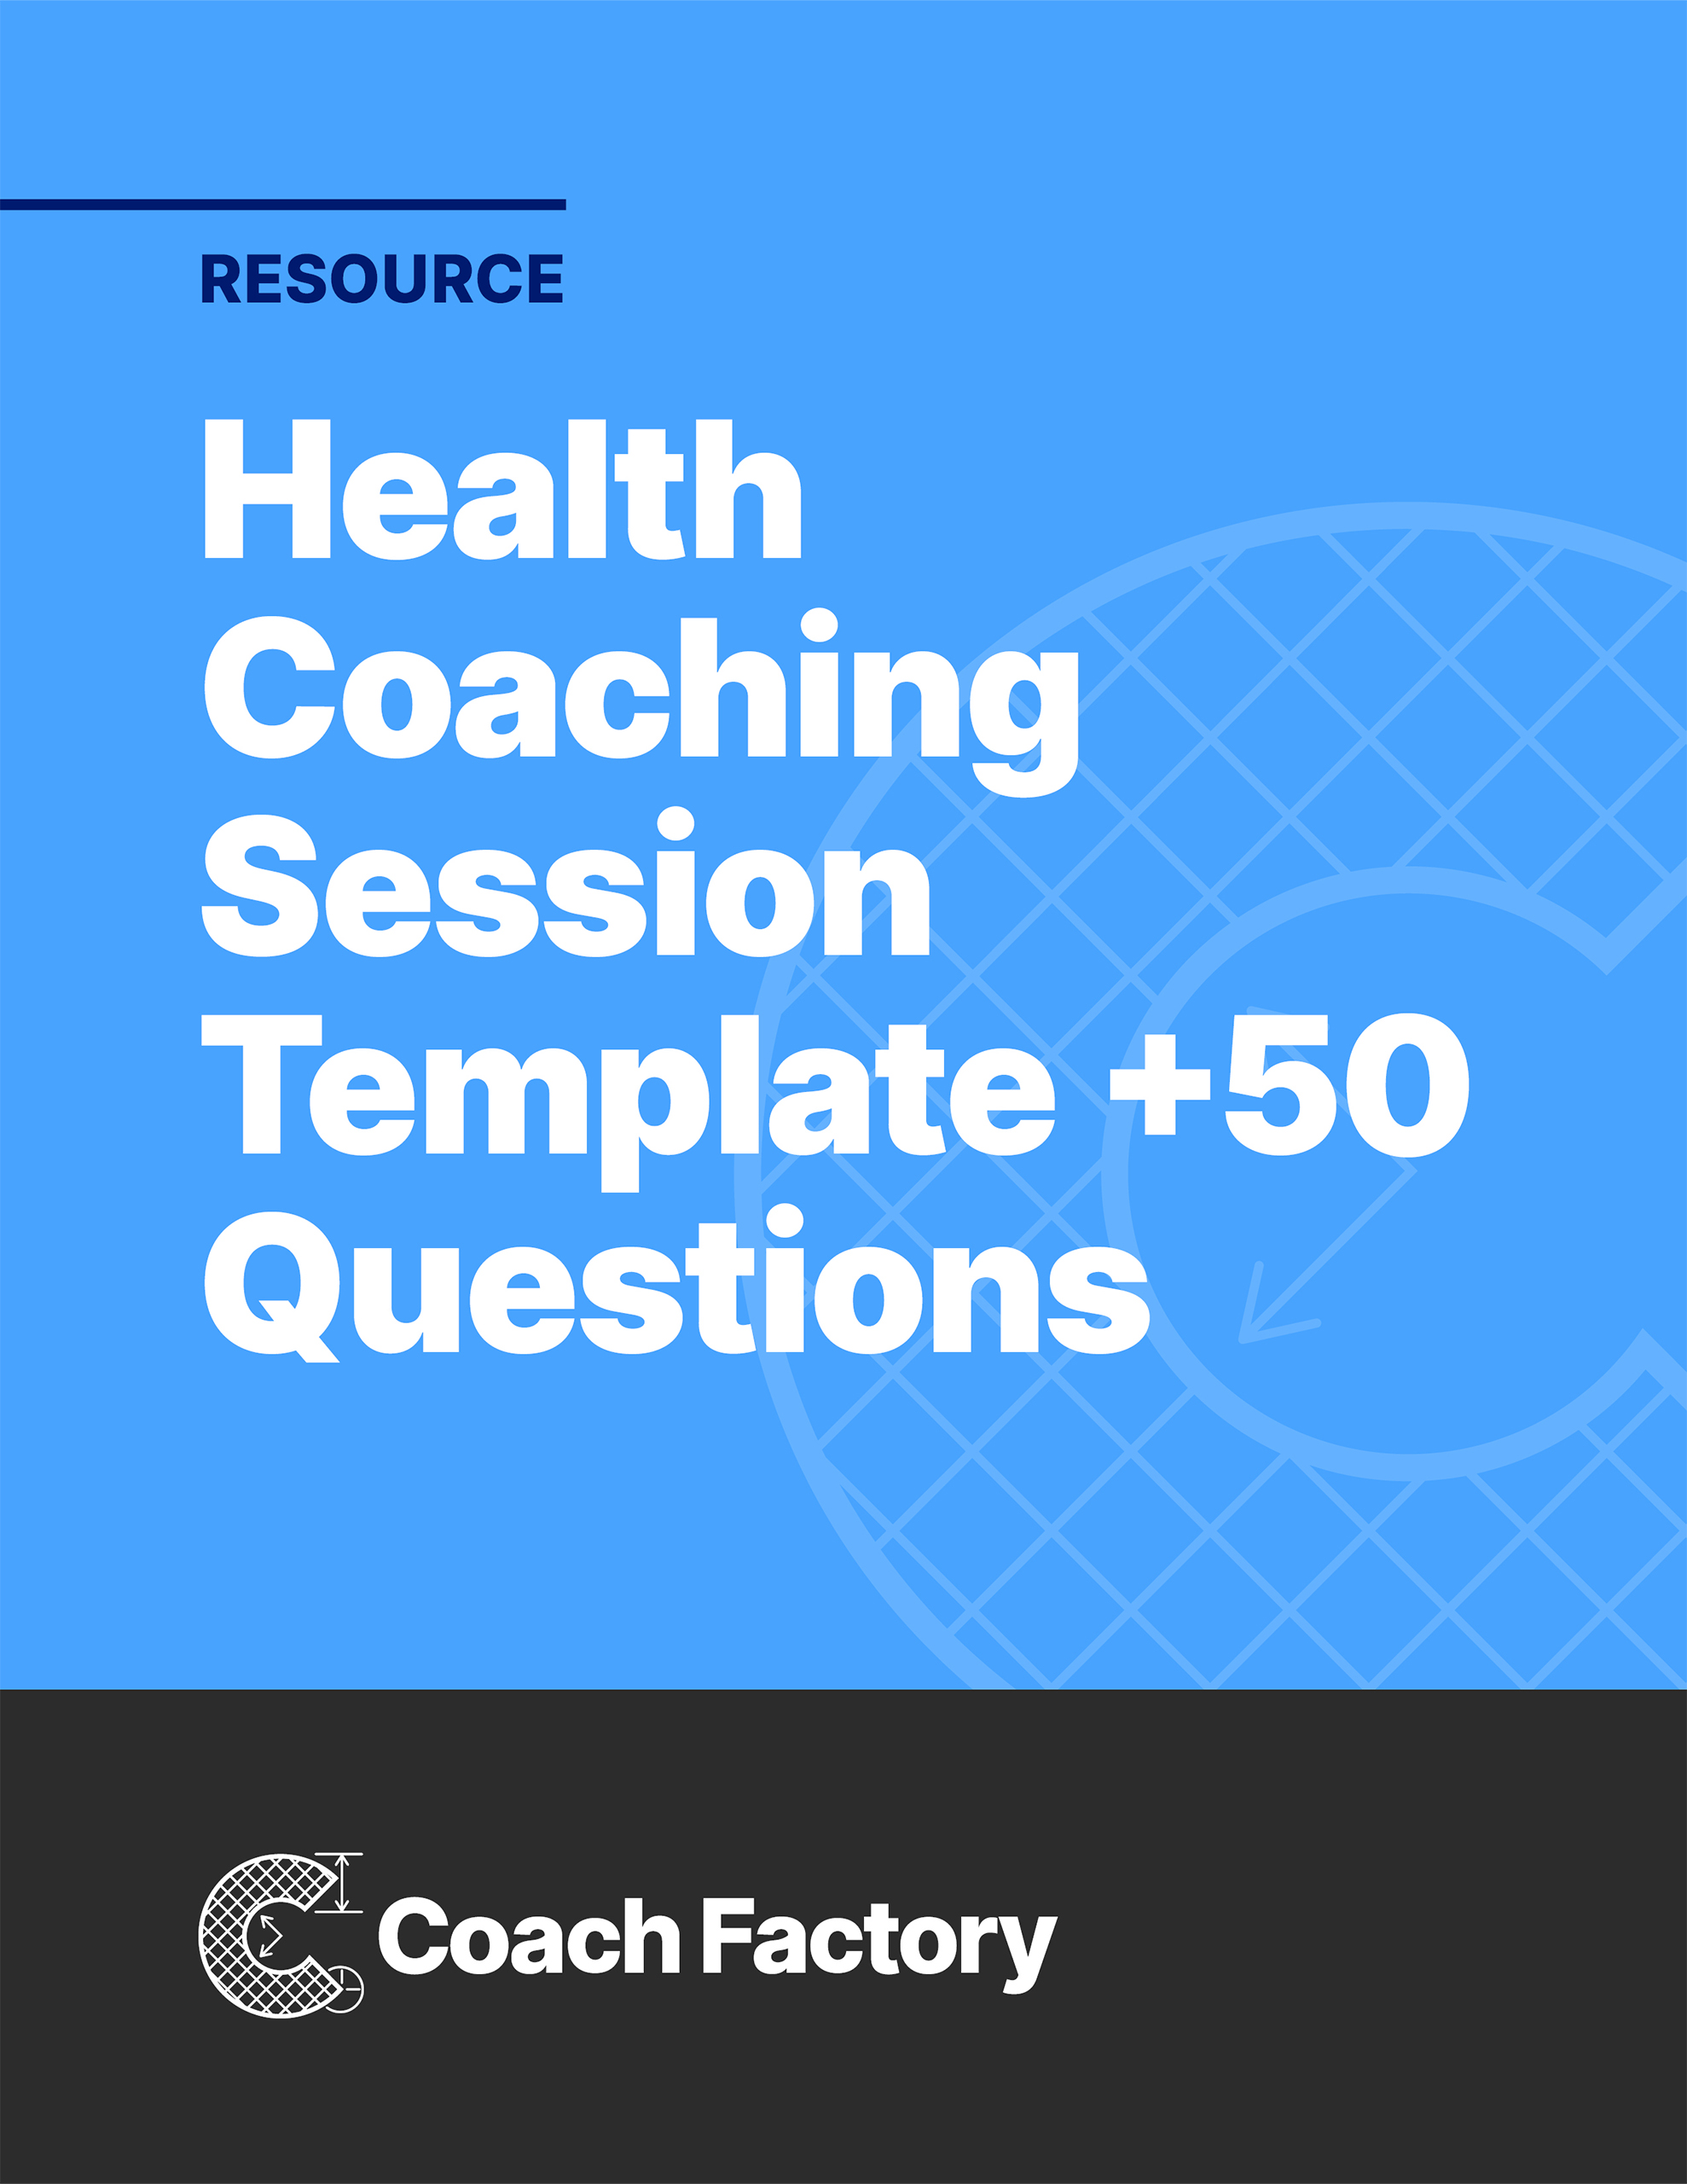 Resource: Health Coaching Session Template +50 Questions